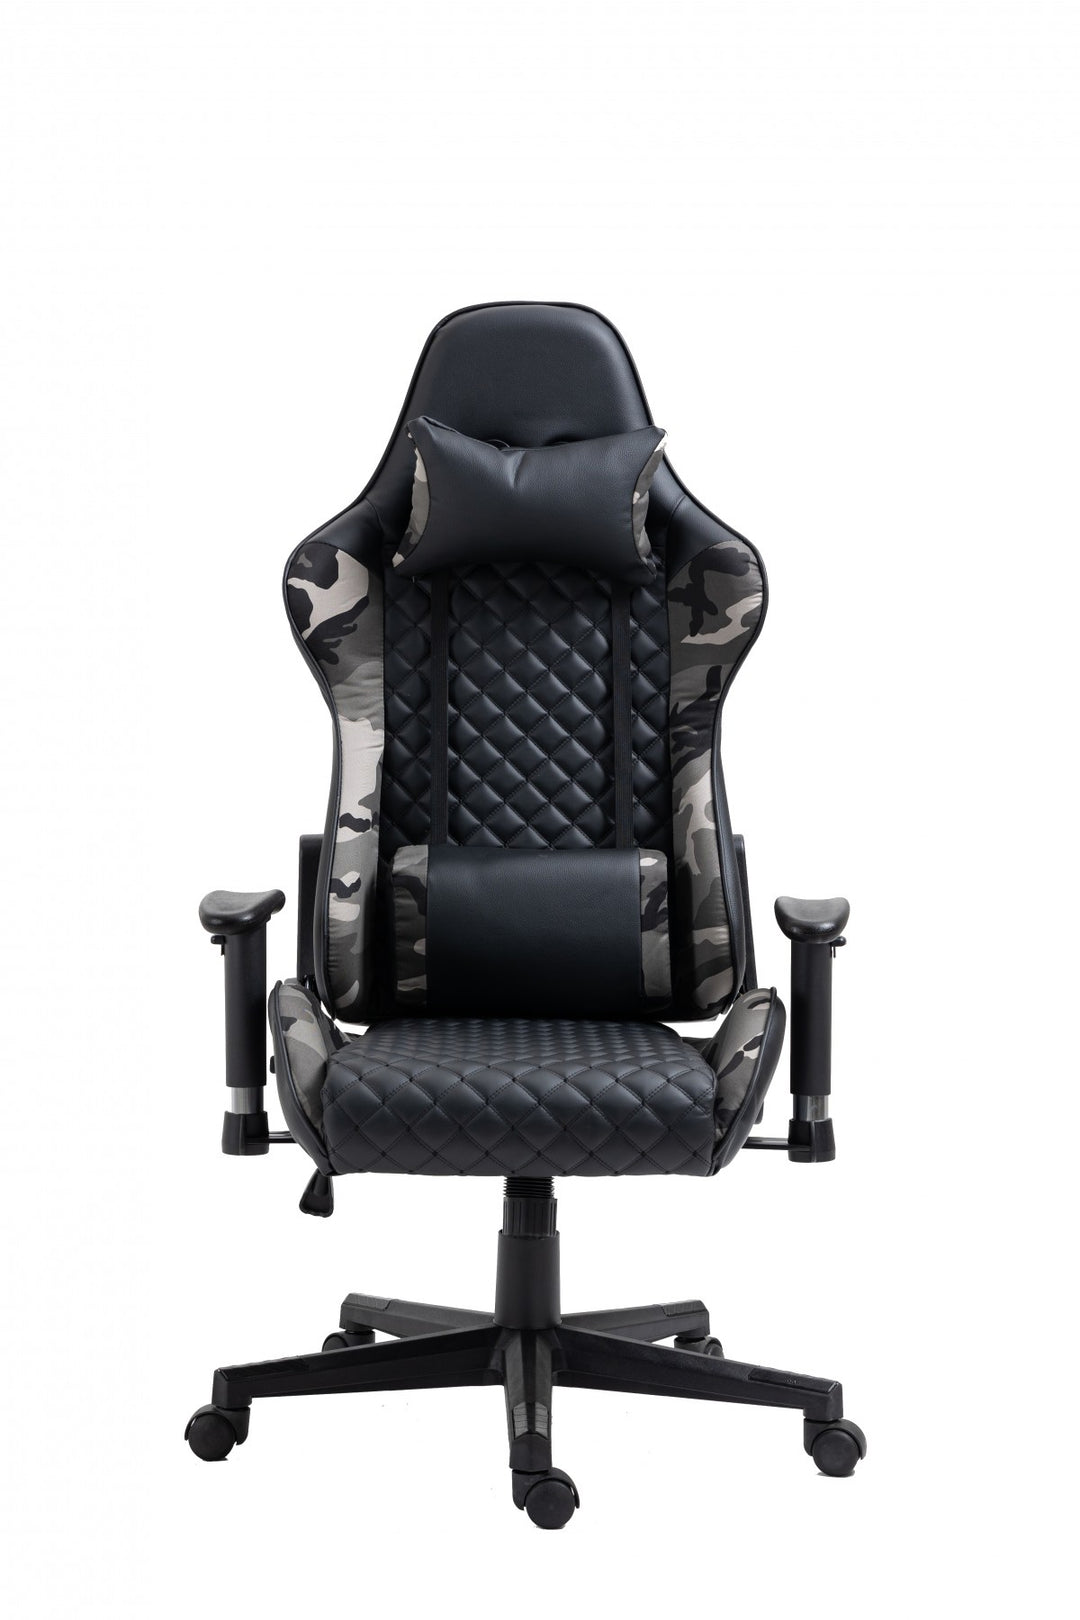 Black/Camo Gaming Chair – Ultimate Comfort and Style